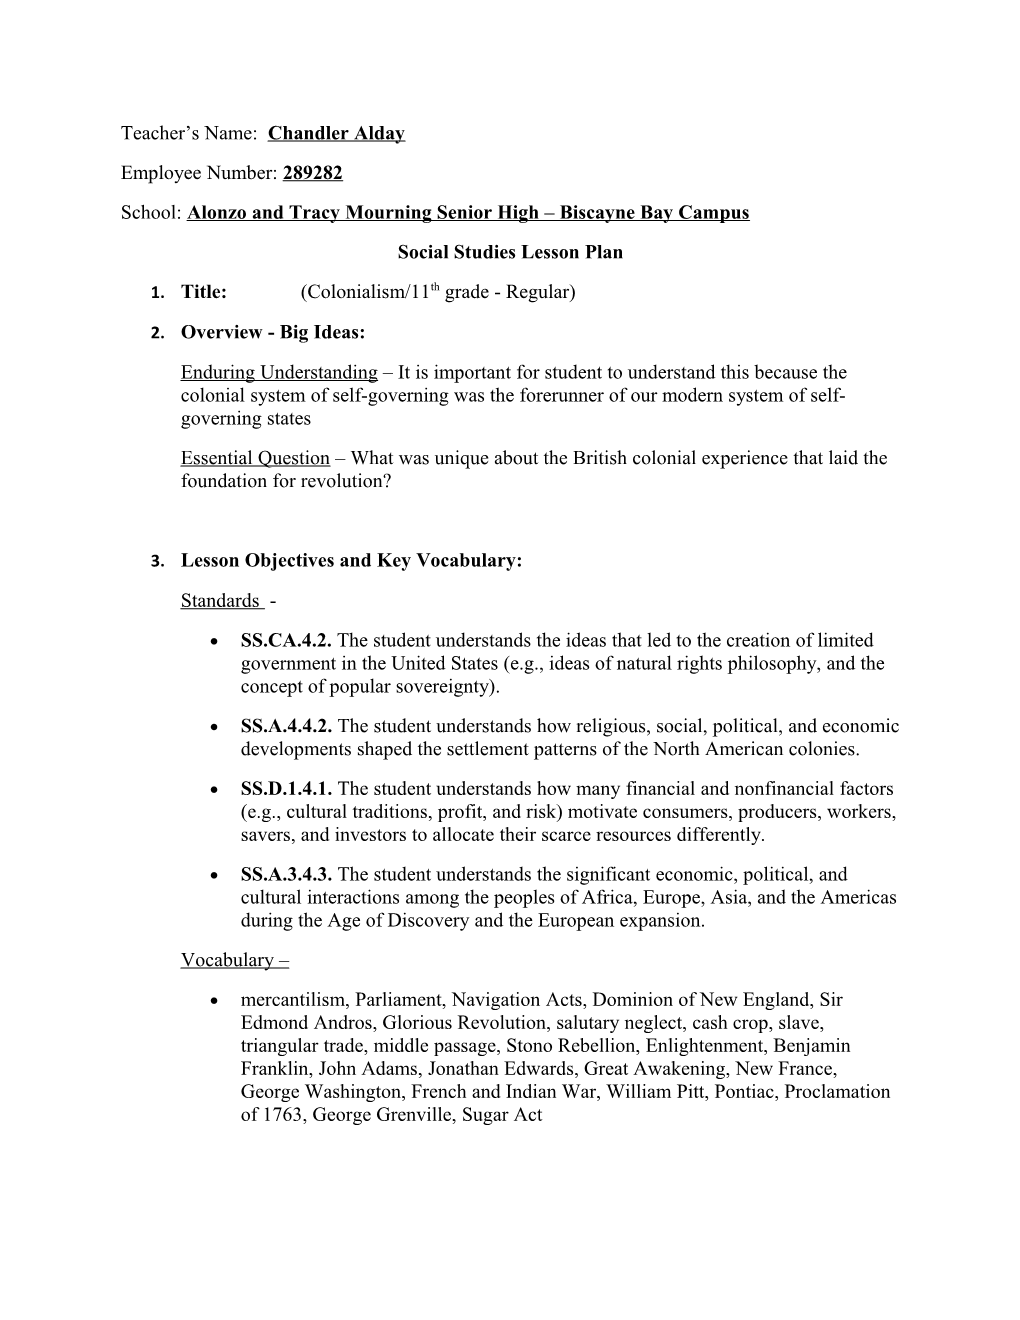 Teaching American History Lesson Plan Template s1